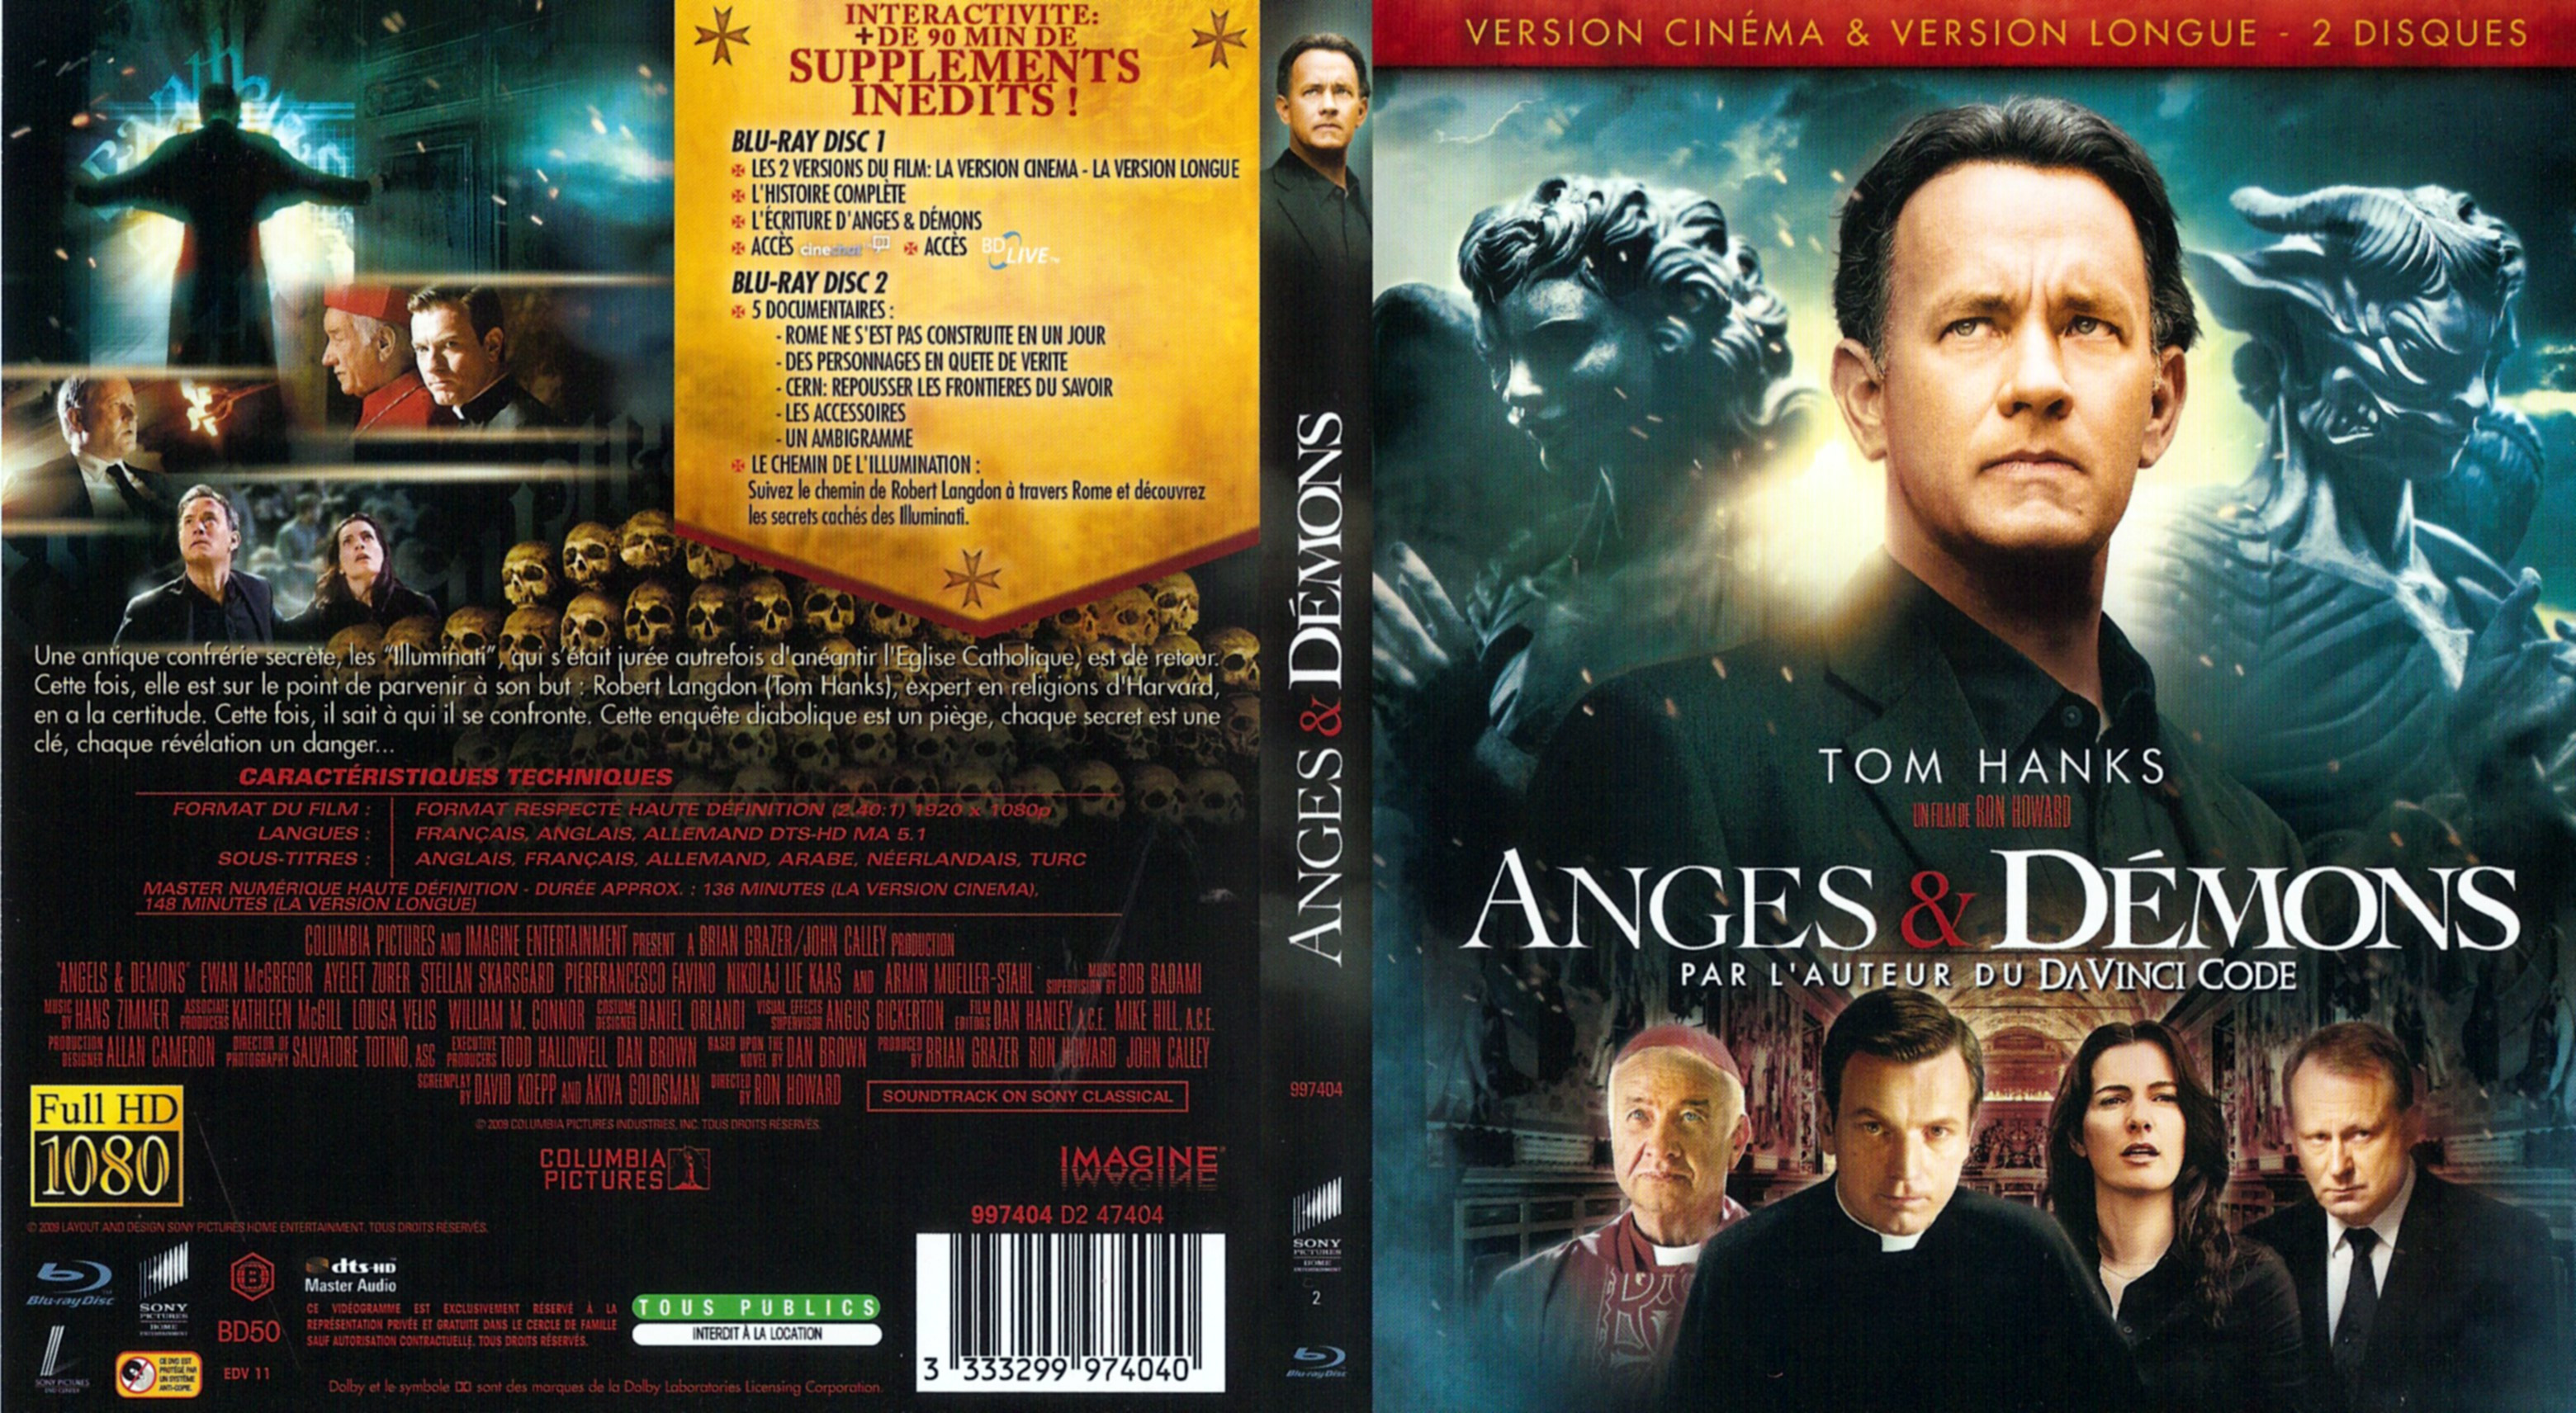 Jaquette DVD Anges et demons (BLU-RAY)